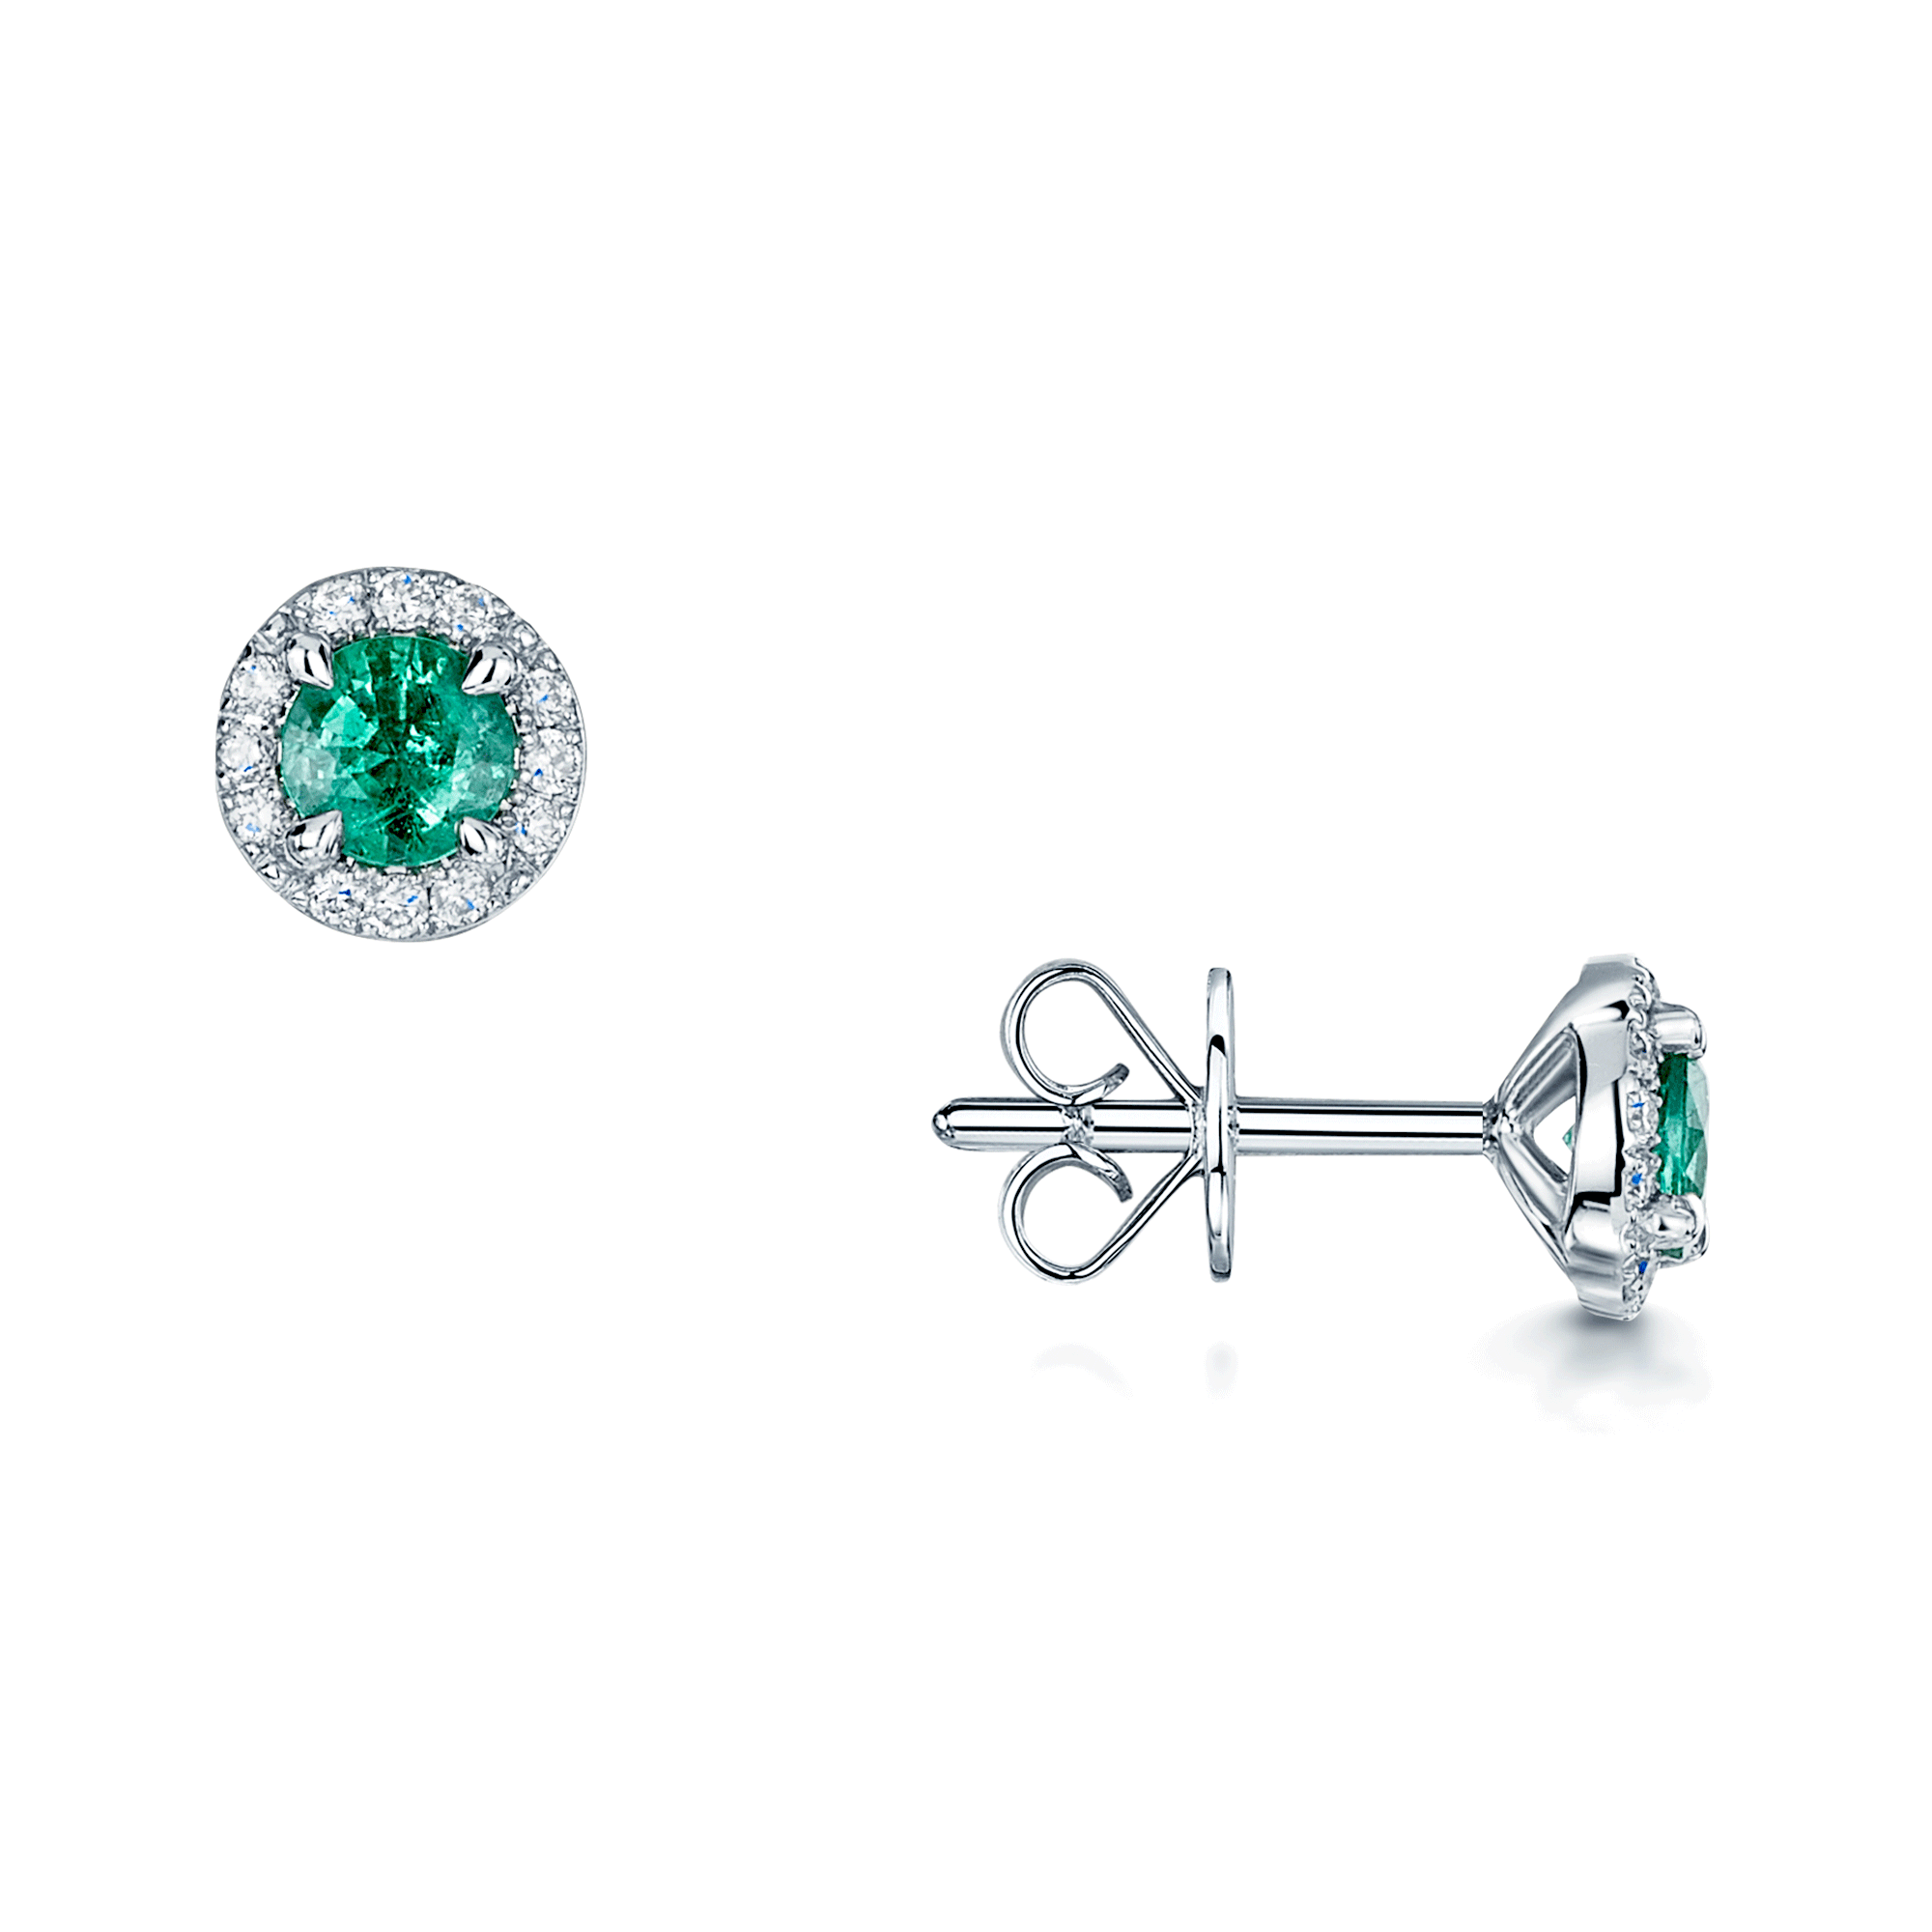 18ct White Gold Emerald And Diamond Cluster Stud Earrings